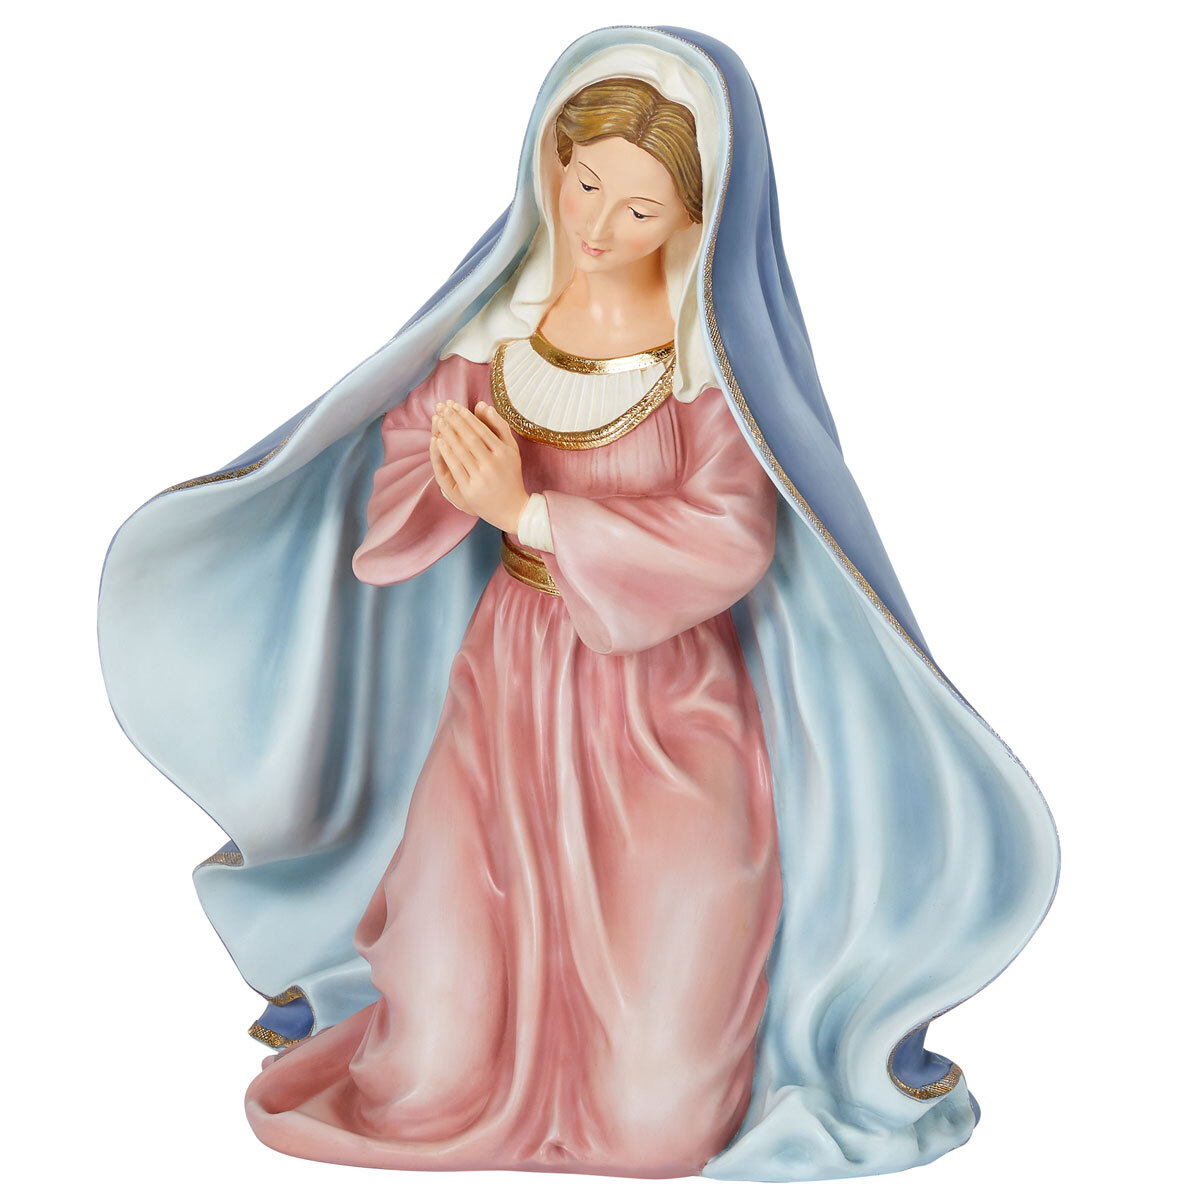 Buy Outdoor Holy Family 4 Piece Set Mary Image at Costco.co.uk